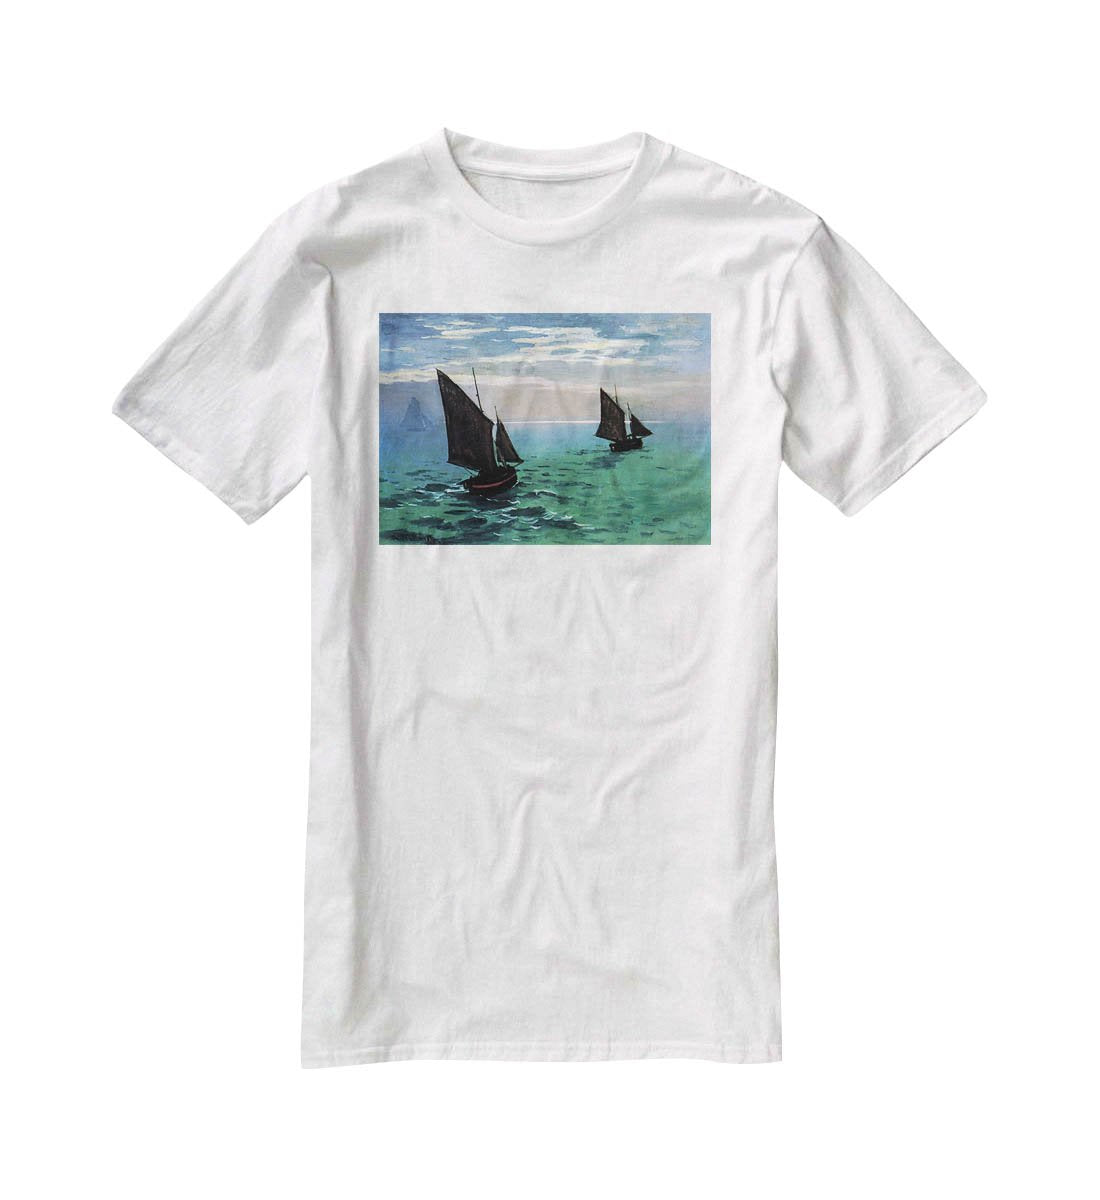 Le Havre exit the fishing boats from the port by Monet T-Shirt - Canvas Art Rocks - 5